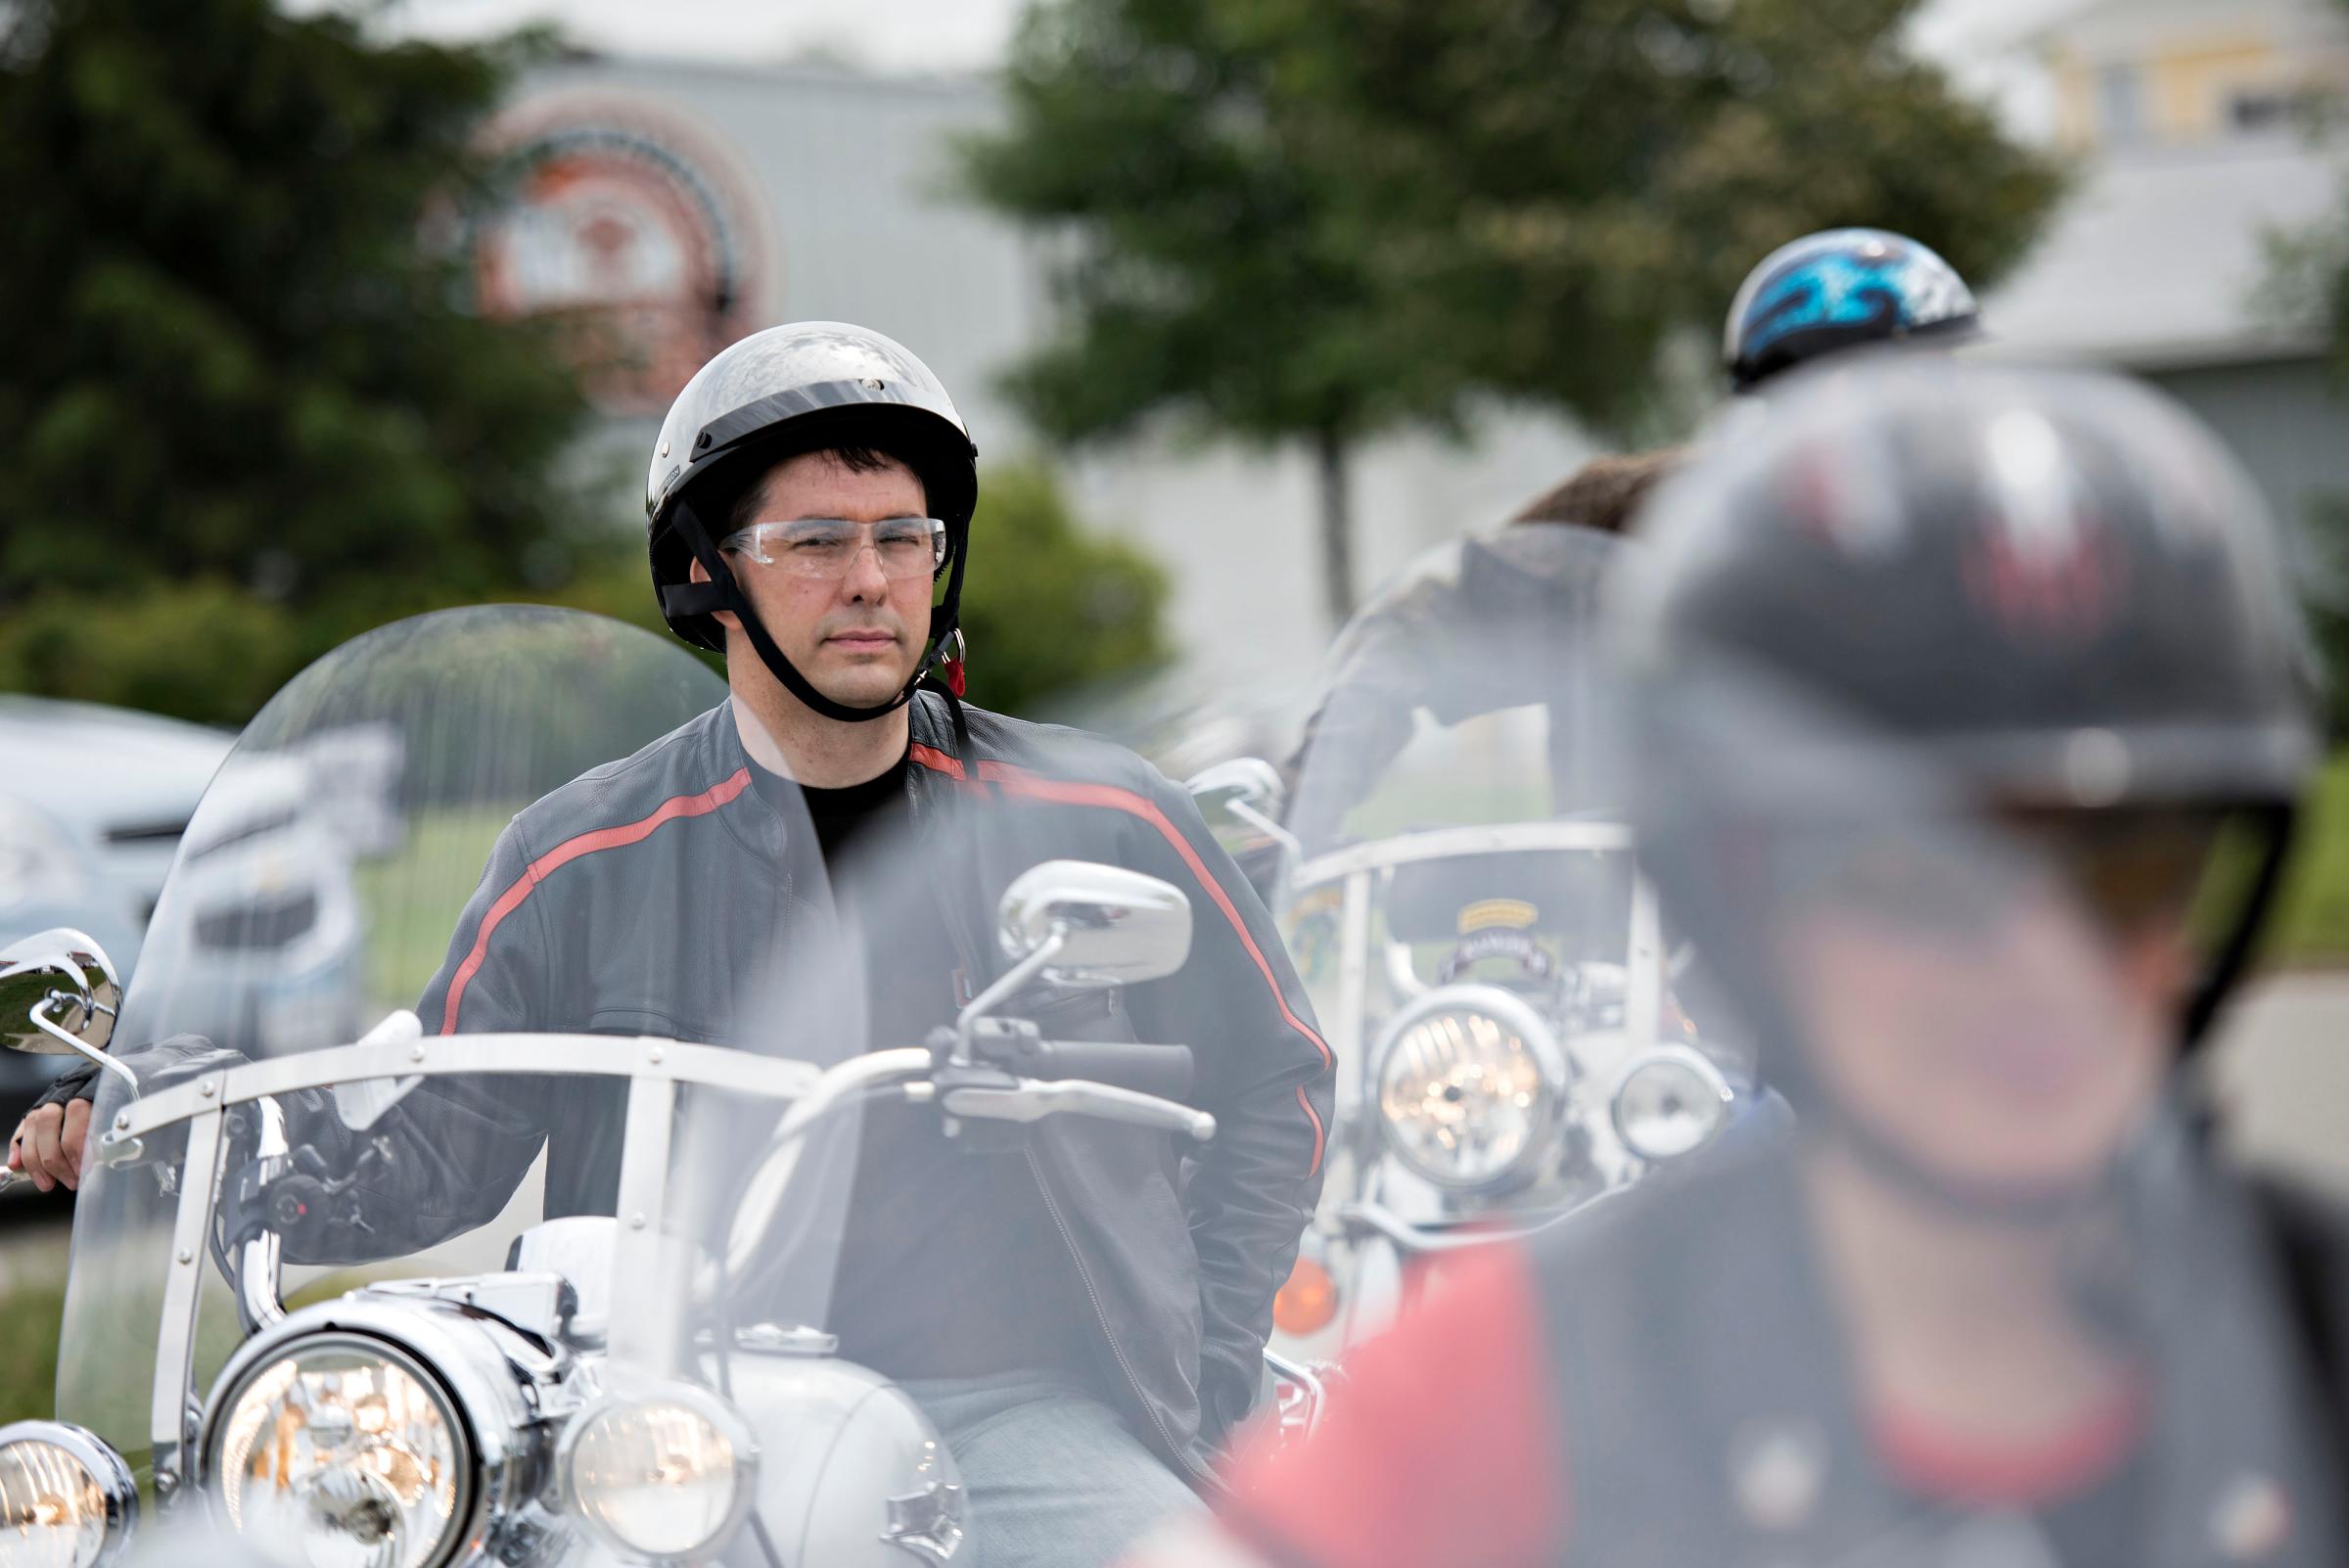 Scott Walker, governor of Wisconsin, sits on a Harley Davidson motorcycle as he awaits the start of a group ride at Big Barn Harley Davidson in Des Moines, Iowa, U.S., on Saturday, June 6, 2015.